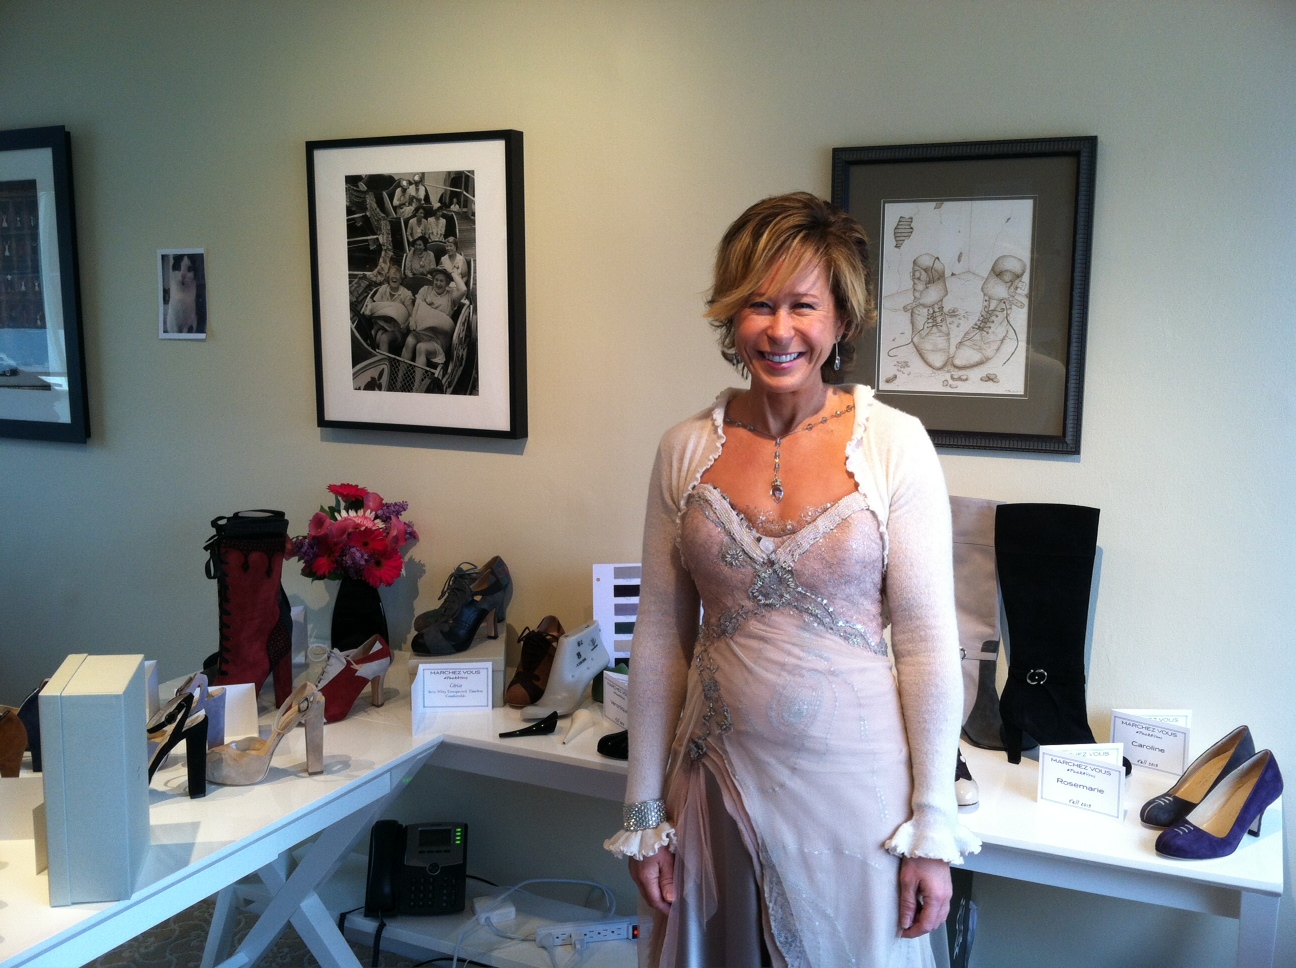 Yeardley in front of styles from her fall 2013 collection. It was "gown Wednesday" in the office.